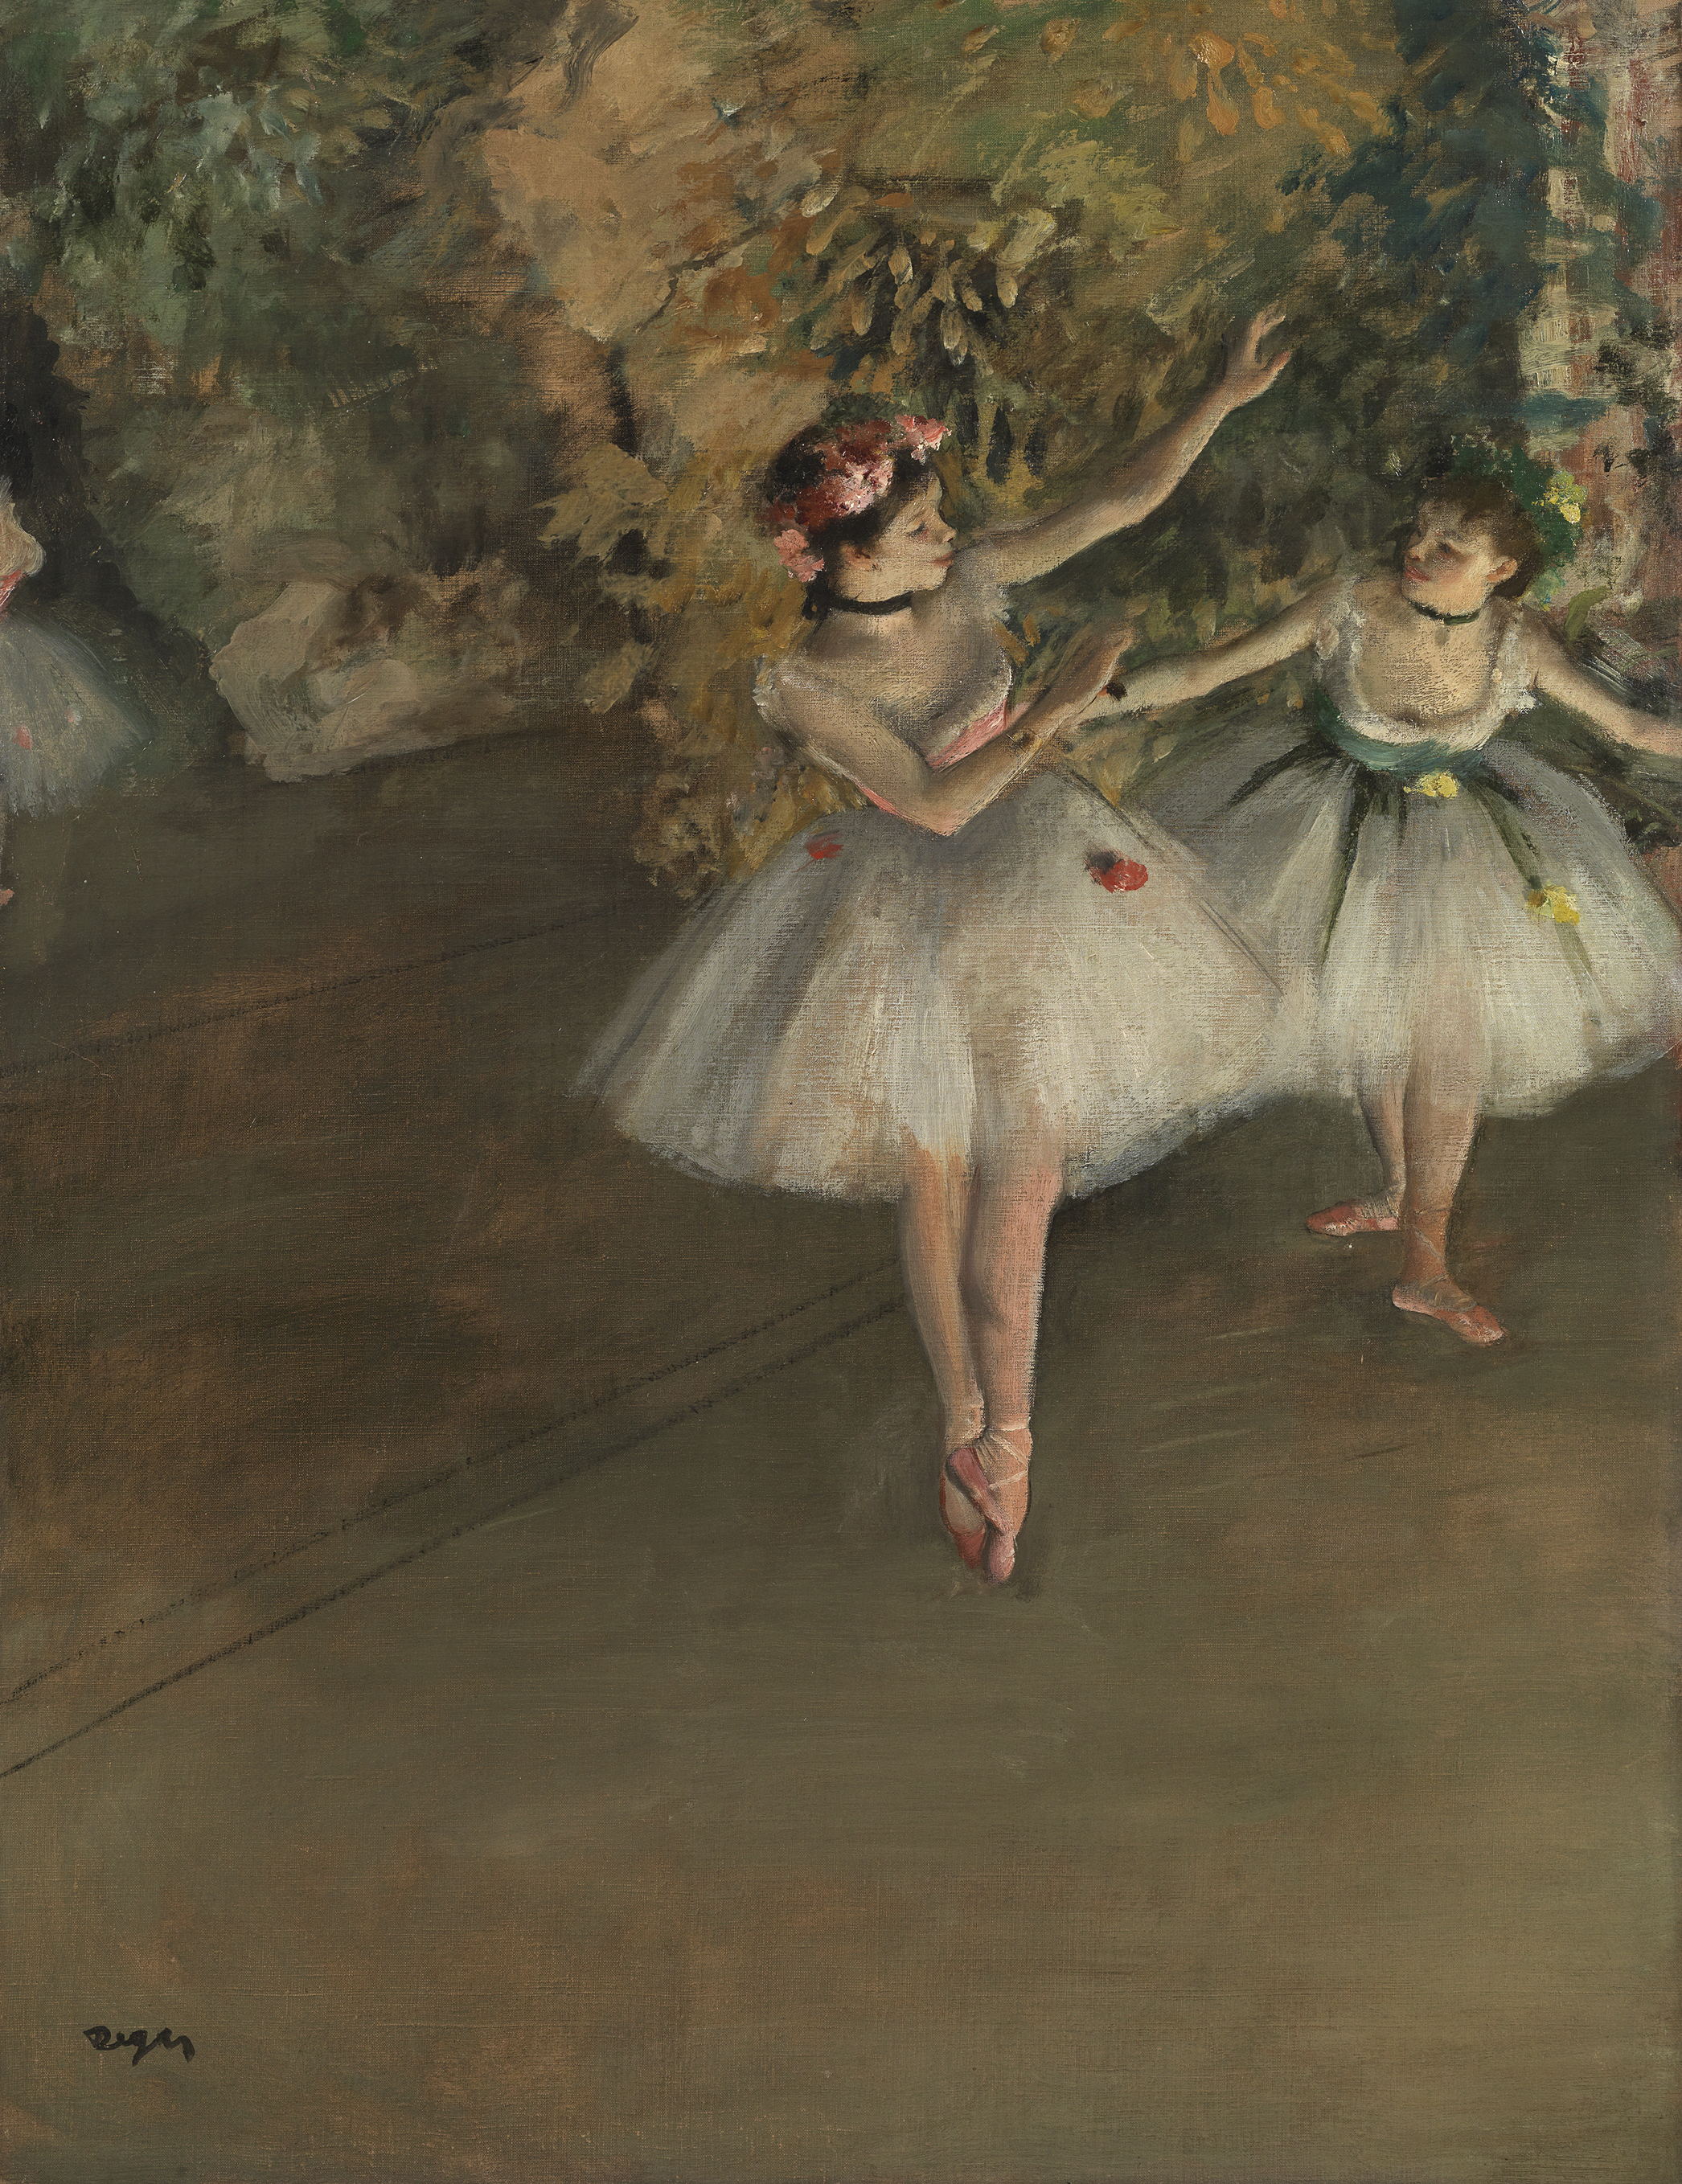 Lauras London A Look At The Courtauld Impressionists At The National Gallery From Manet To 